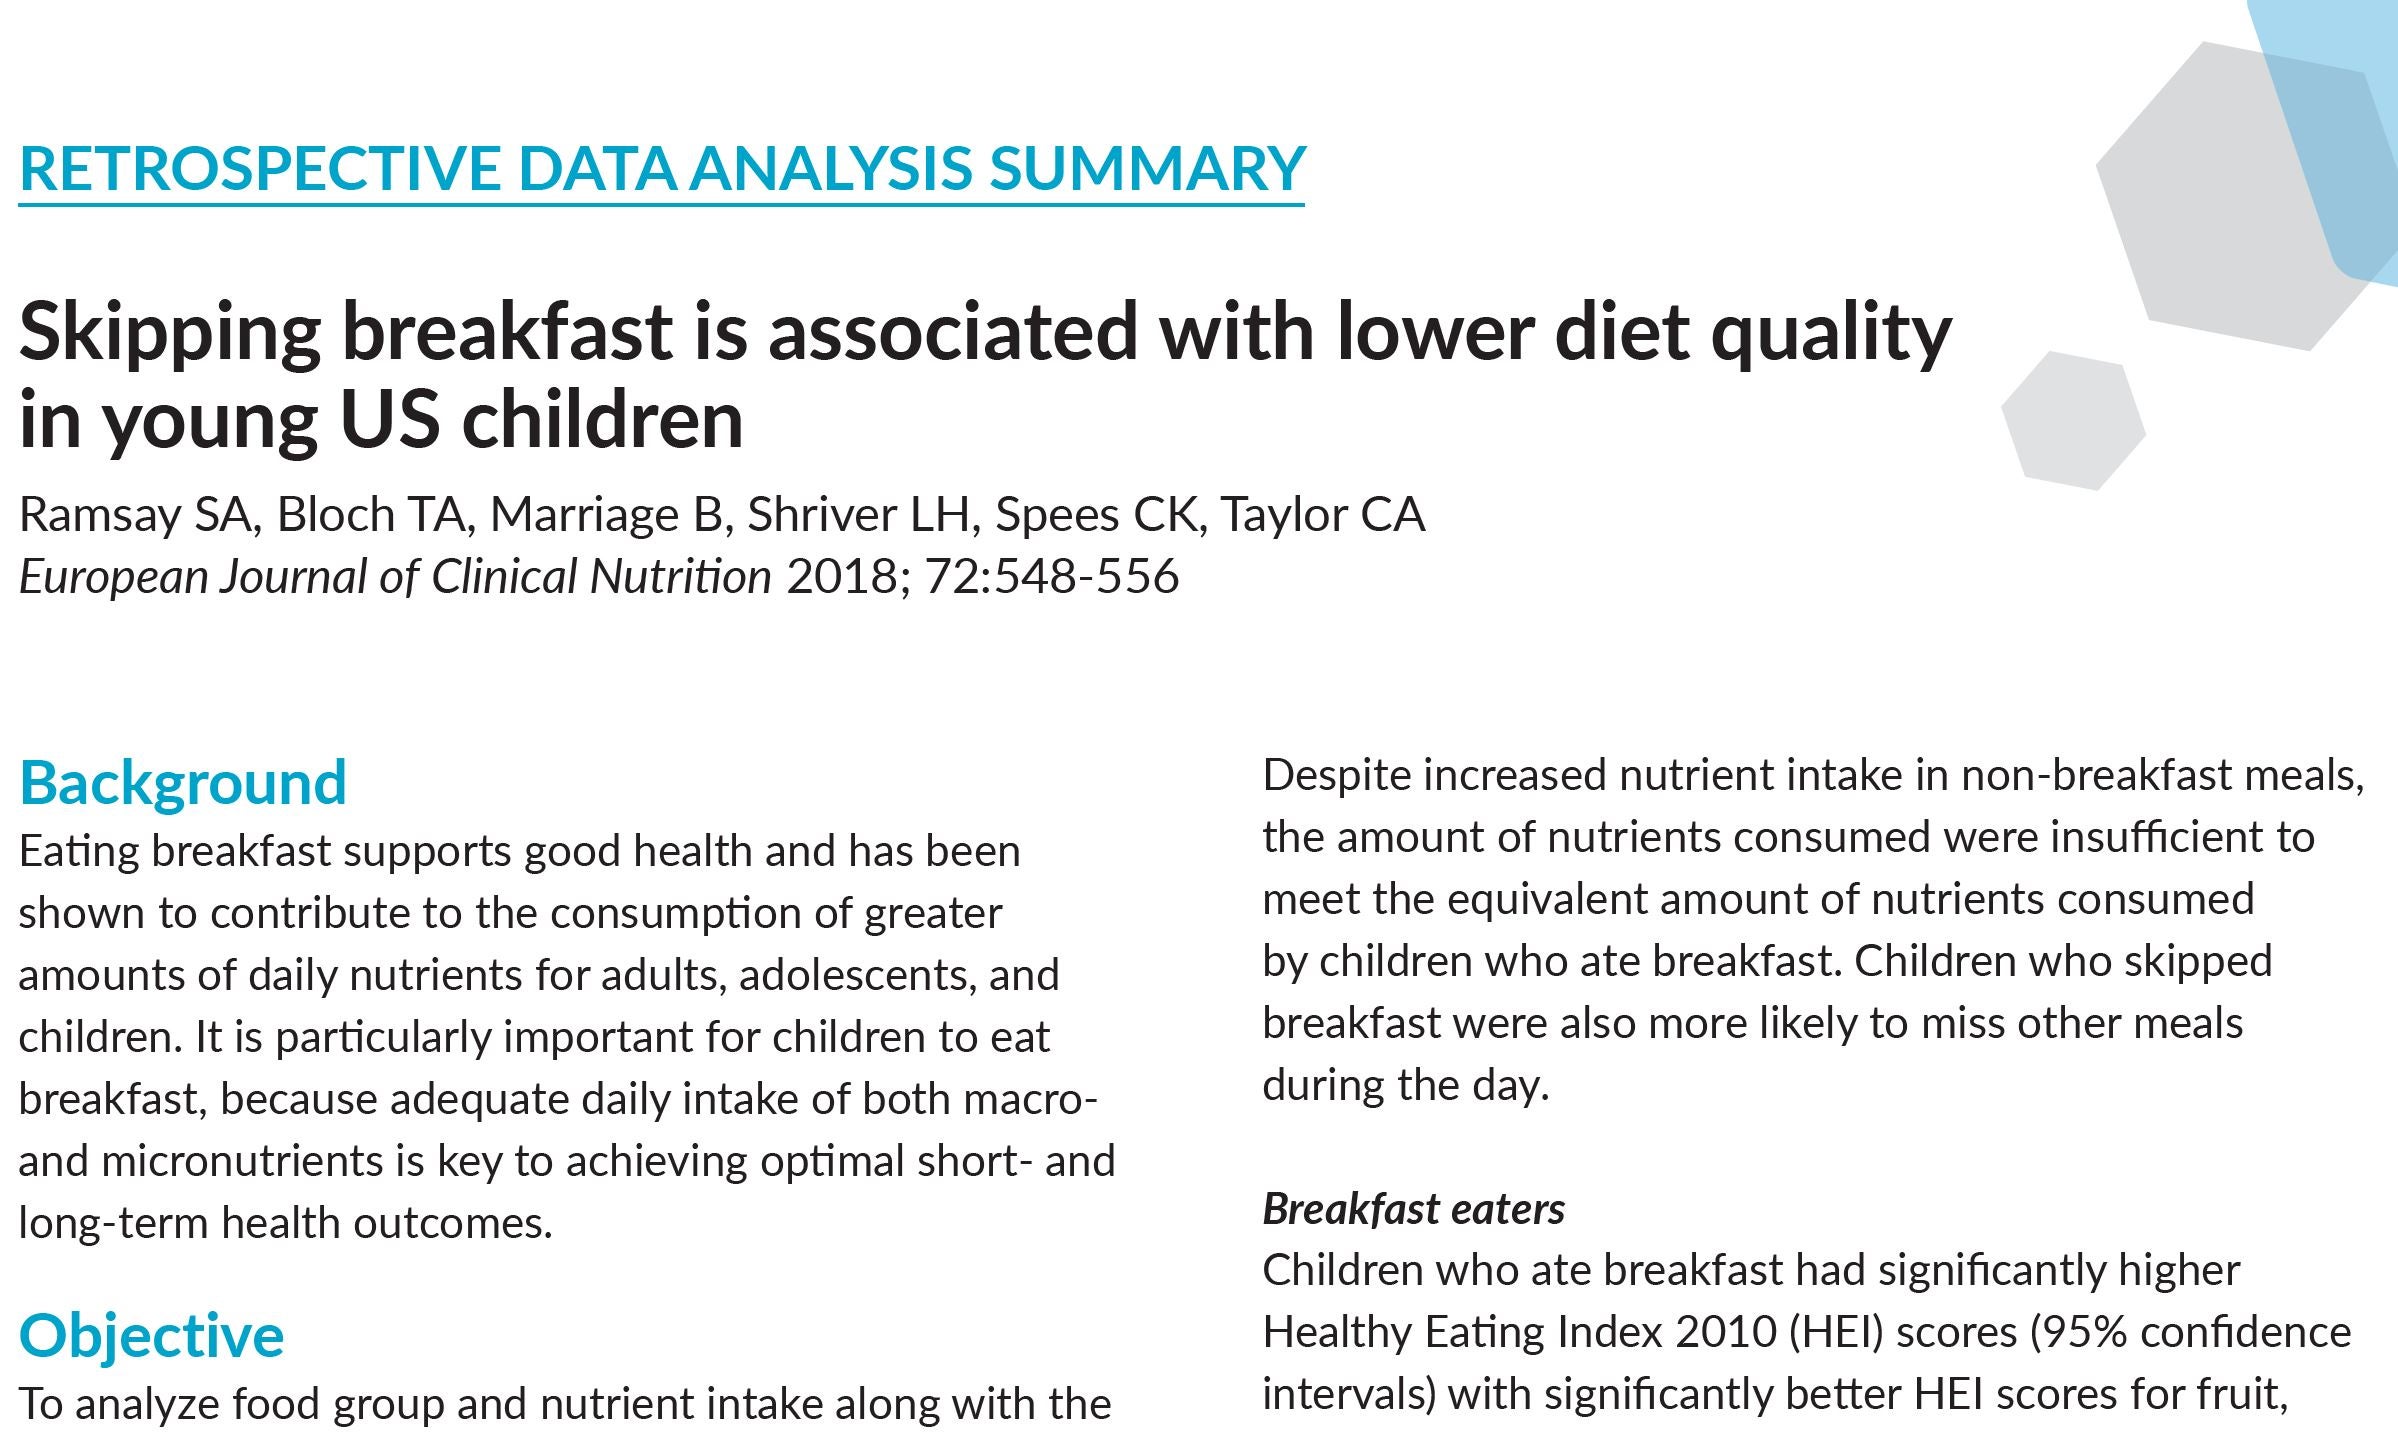 Skipping Breakfast is Associated with Lower Diet Quality in Young US Children